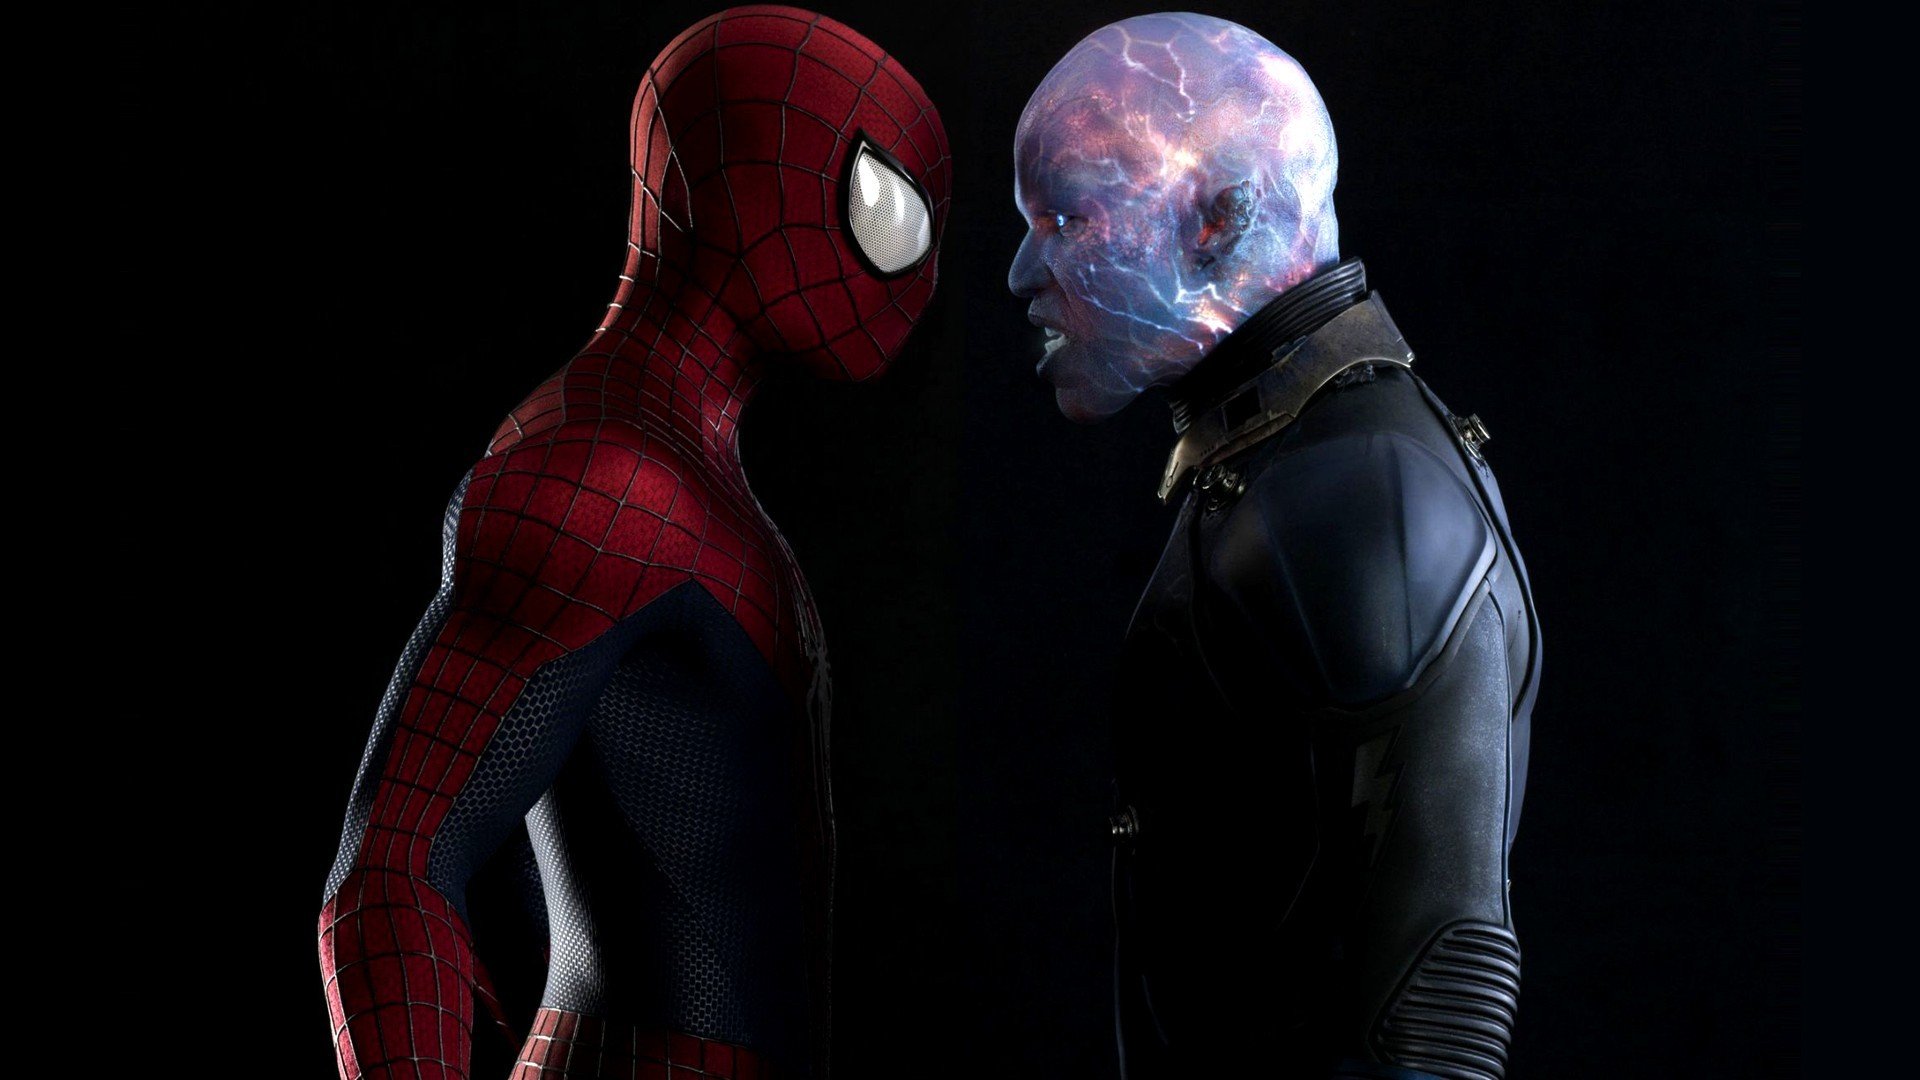 Download Hd 1080p The Amazing Spider Man 2 Pc Wallpaper Id102271